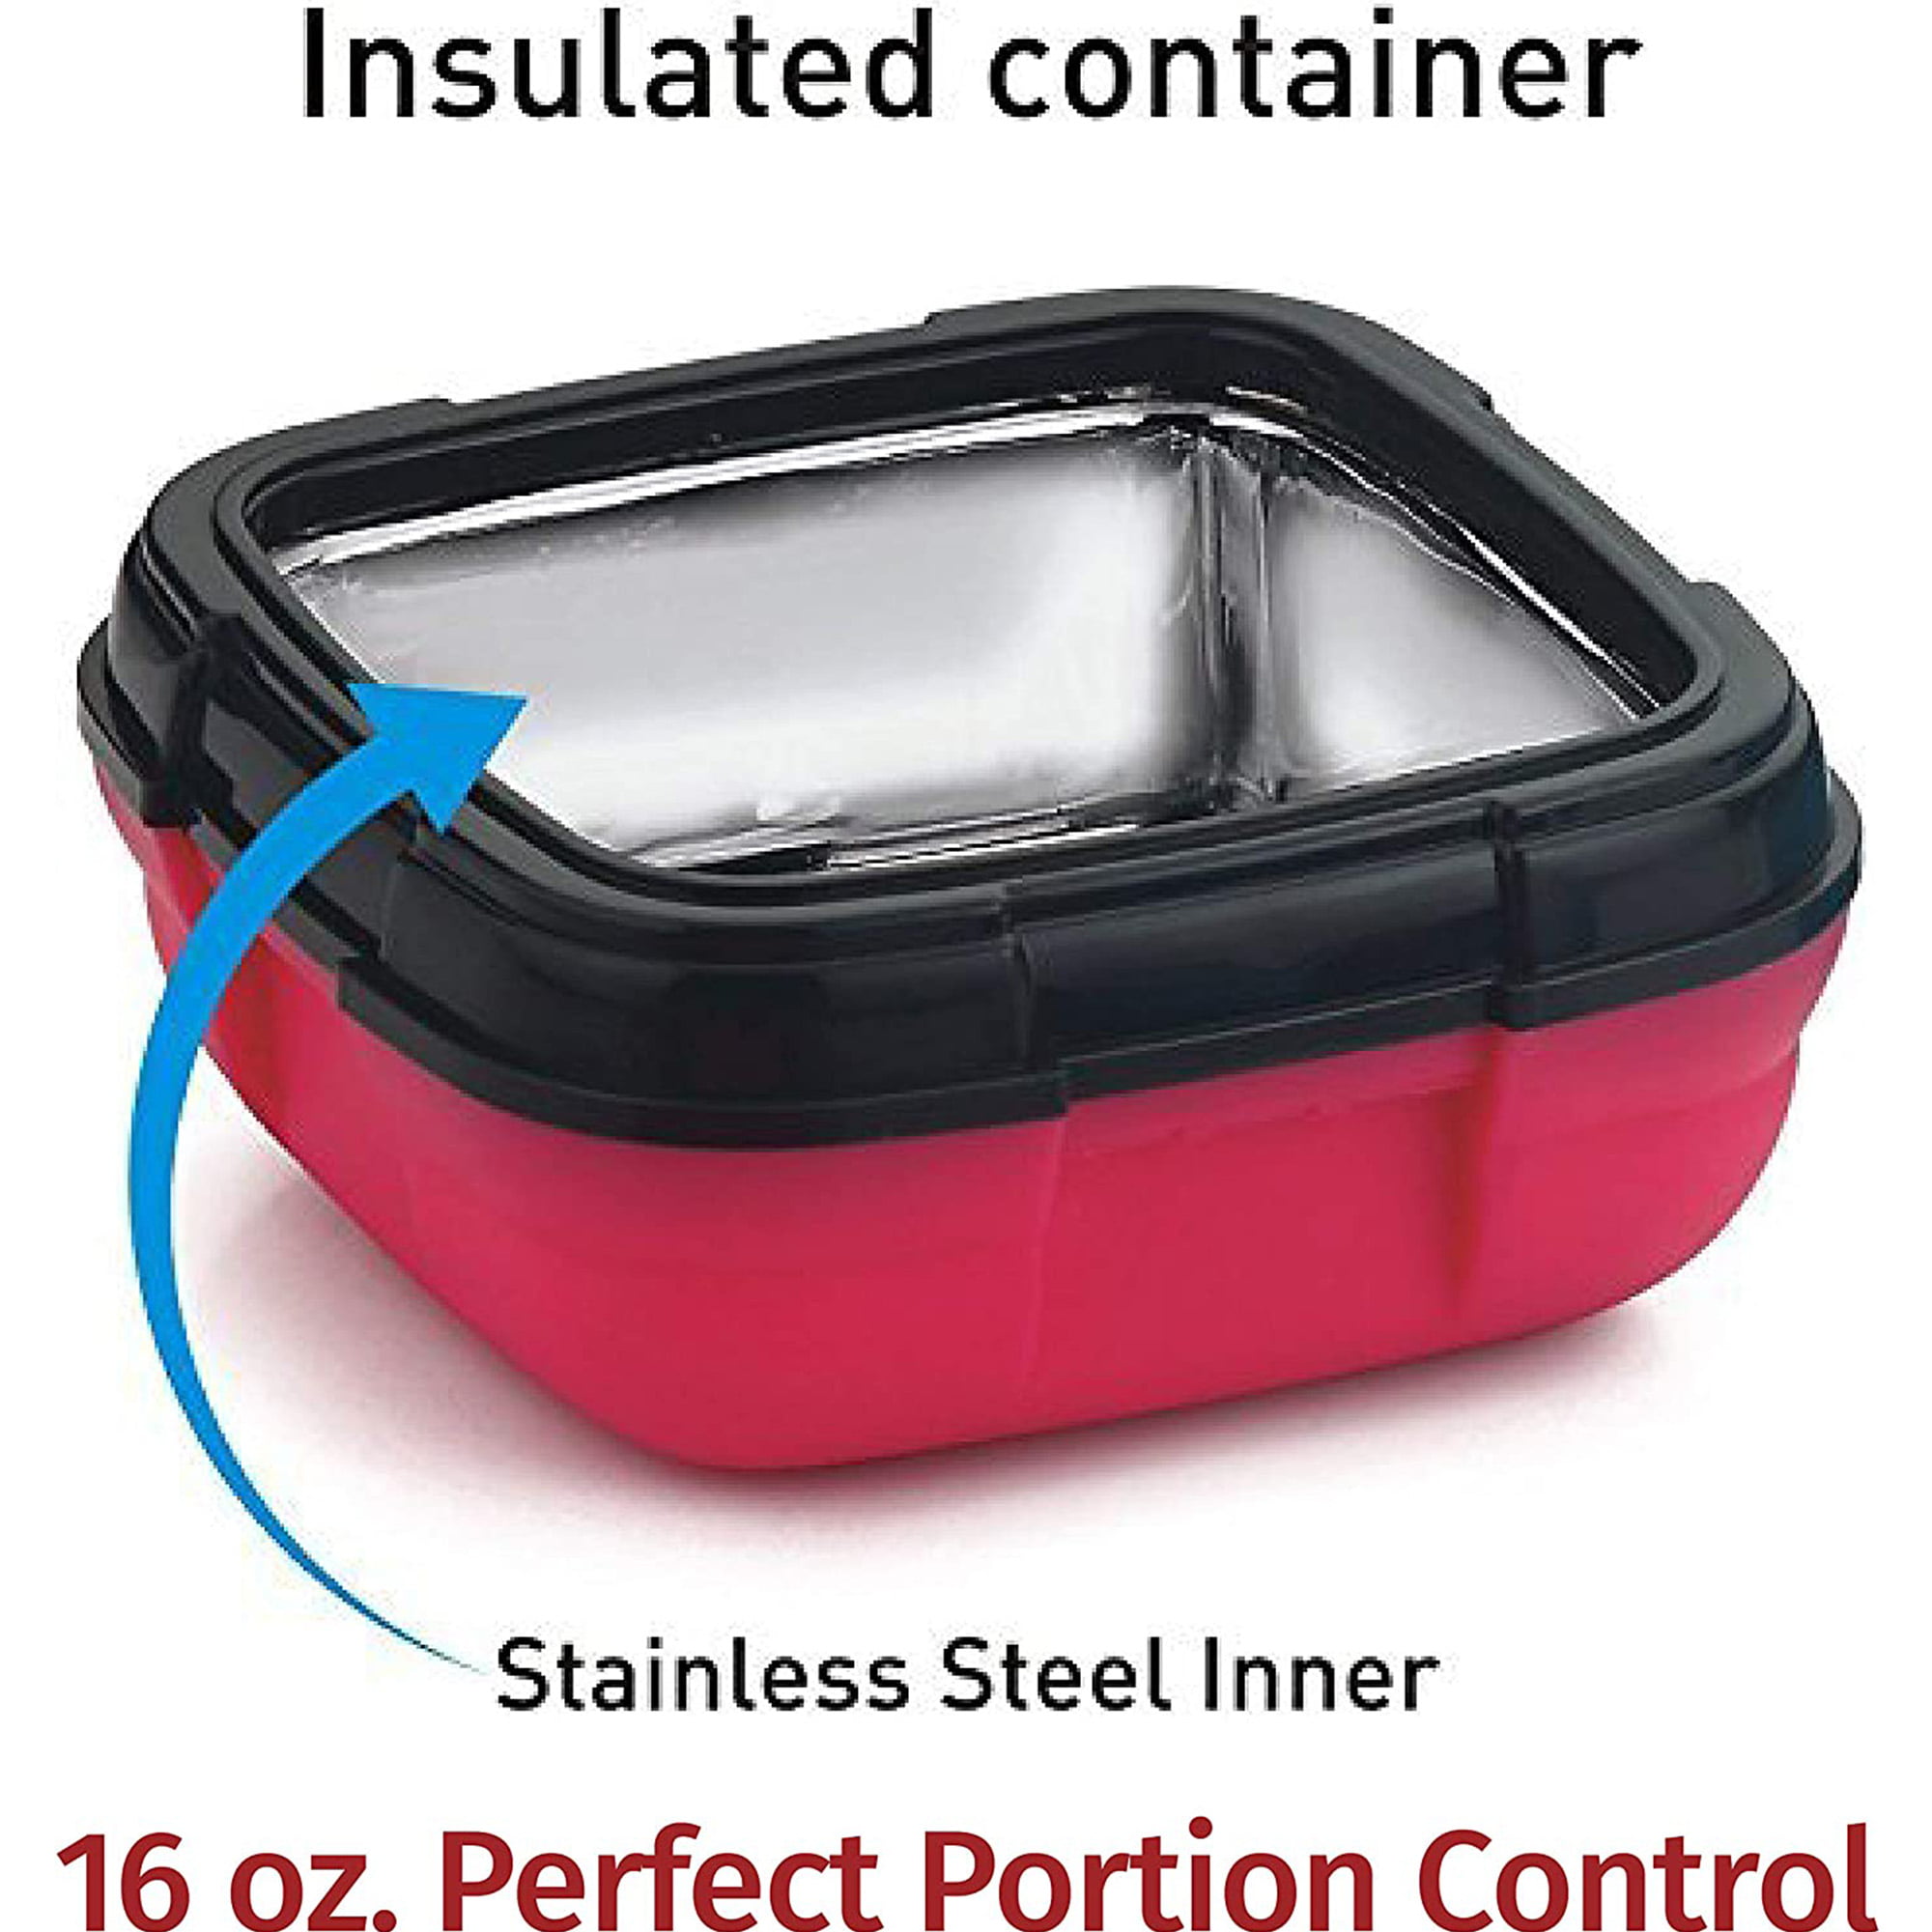 Pinnacle PentaGo Thermoware Insulated Tiffin Box, Adjustable